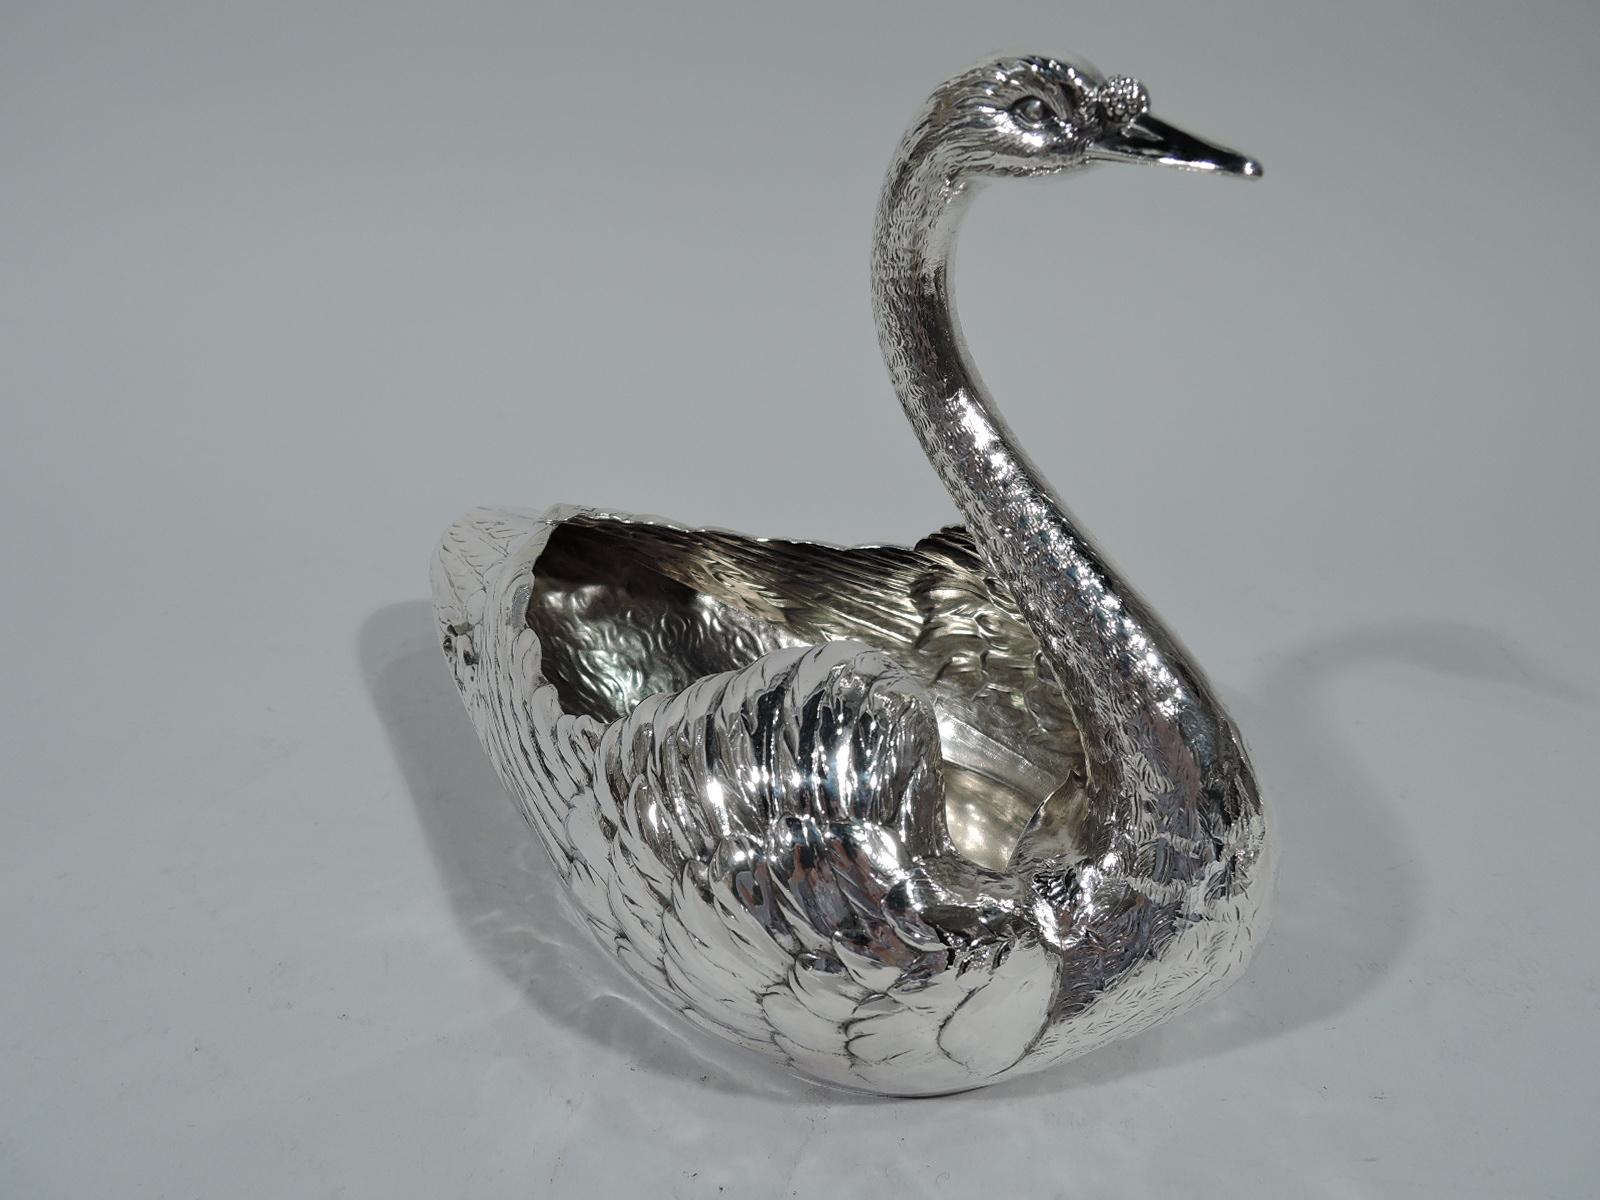 Edwardian Pair of Antique American Sterling Silver Swans by Gorham